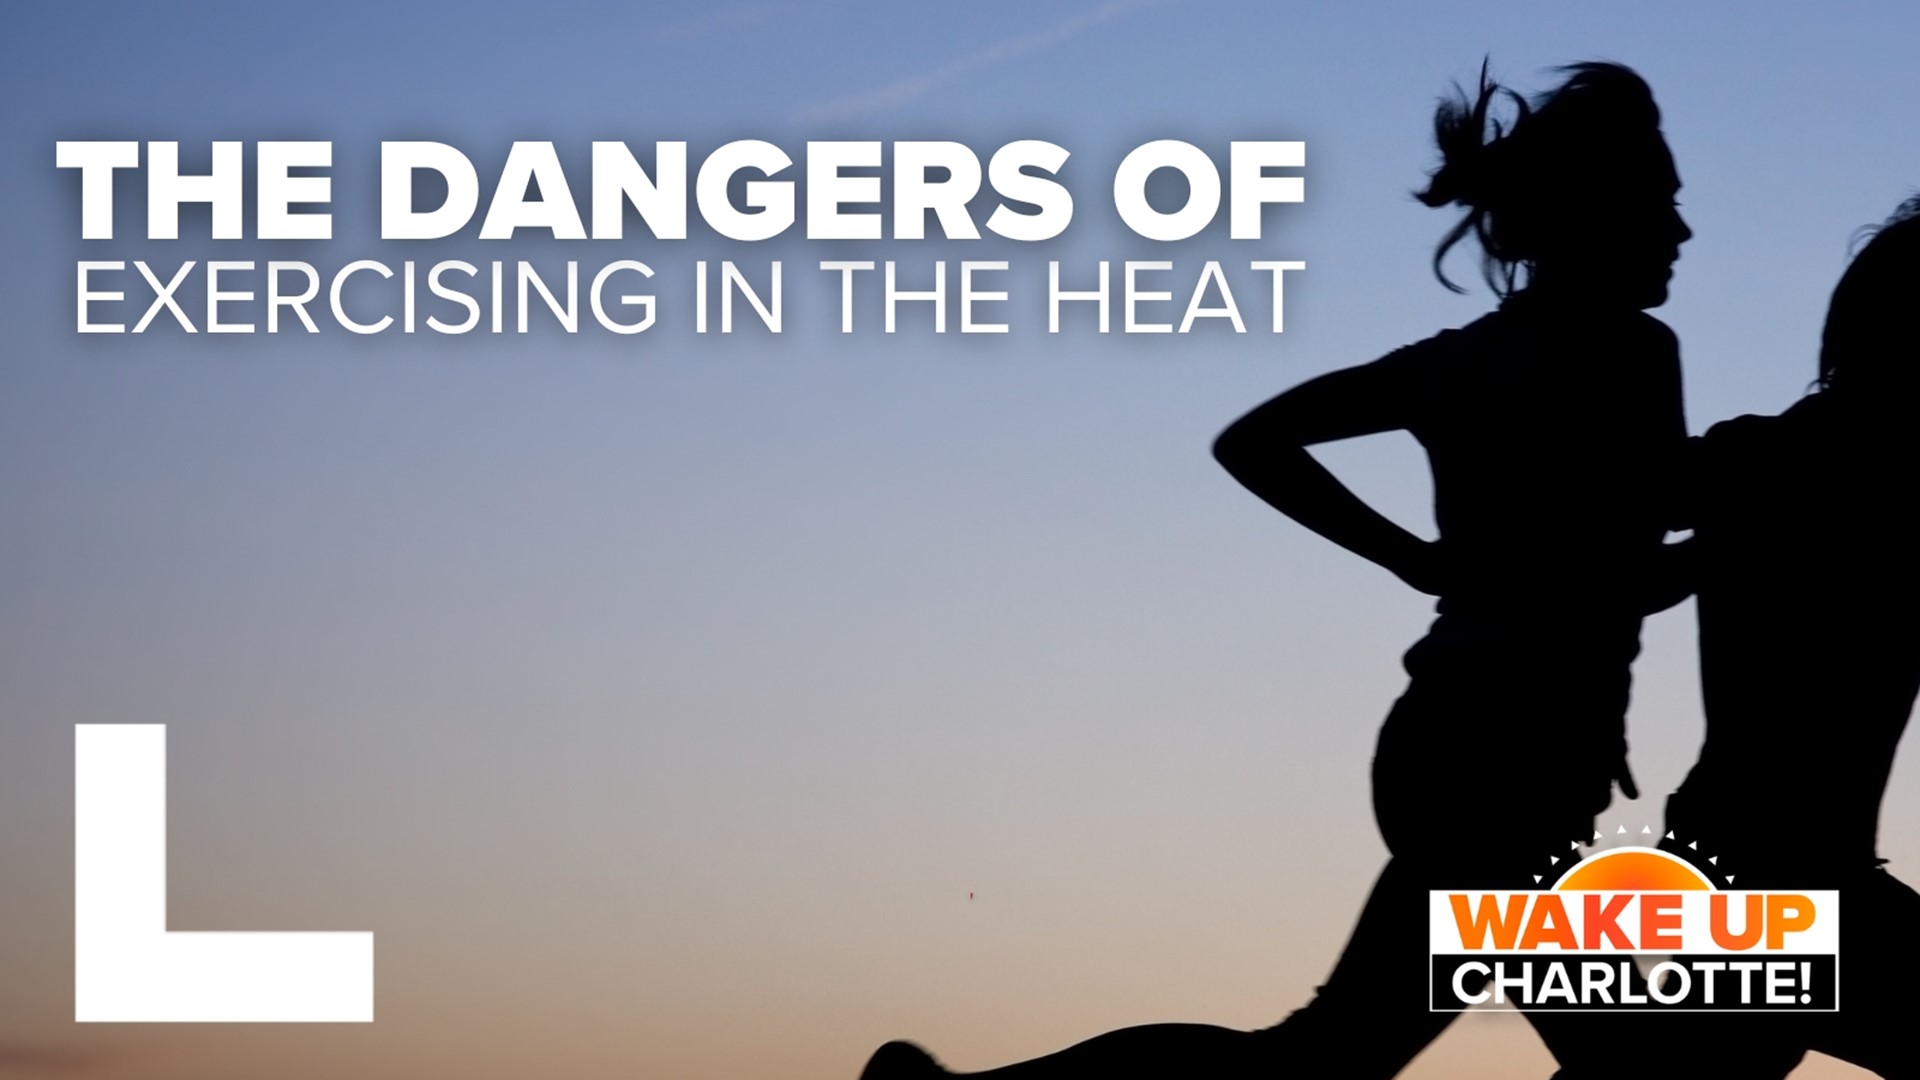 According to the Washington Post, the consequences of a too-hot workout can range from feeling thirsty to death.